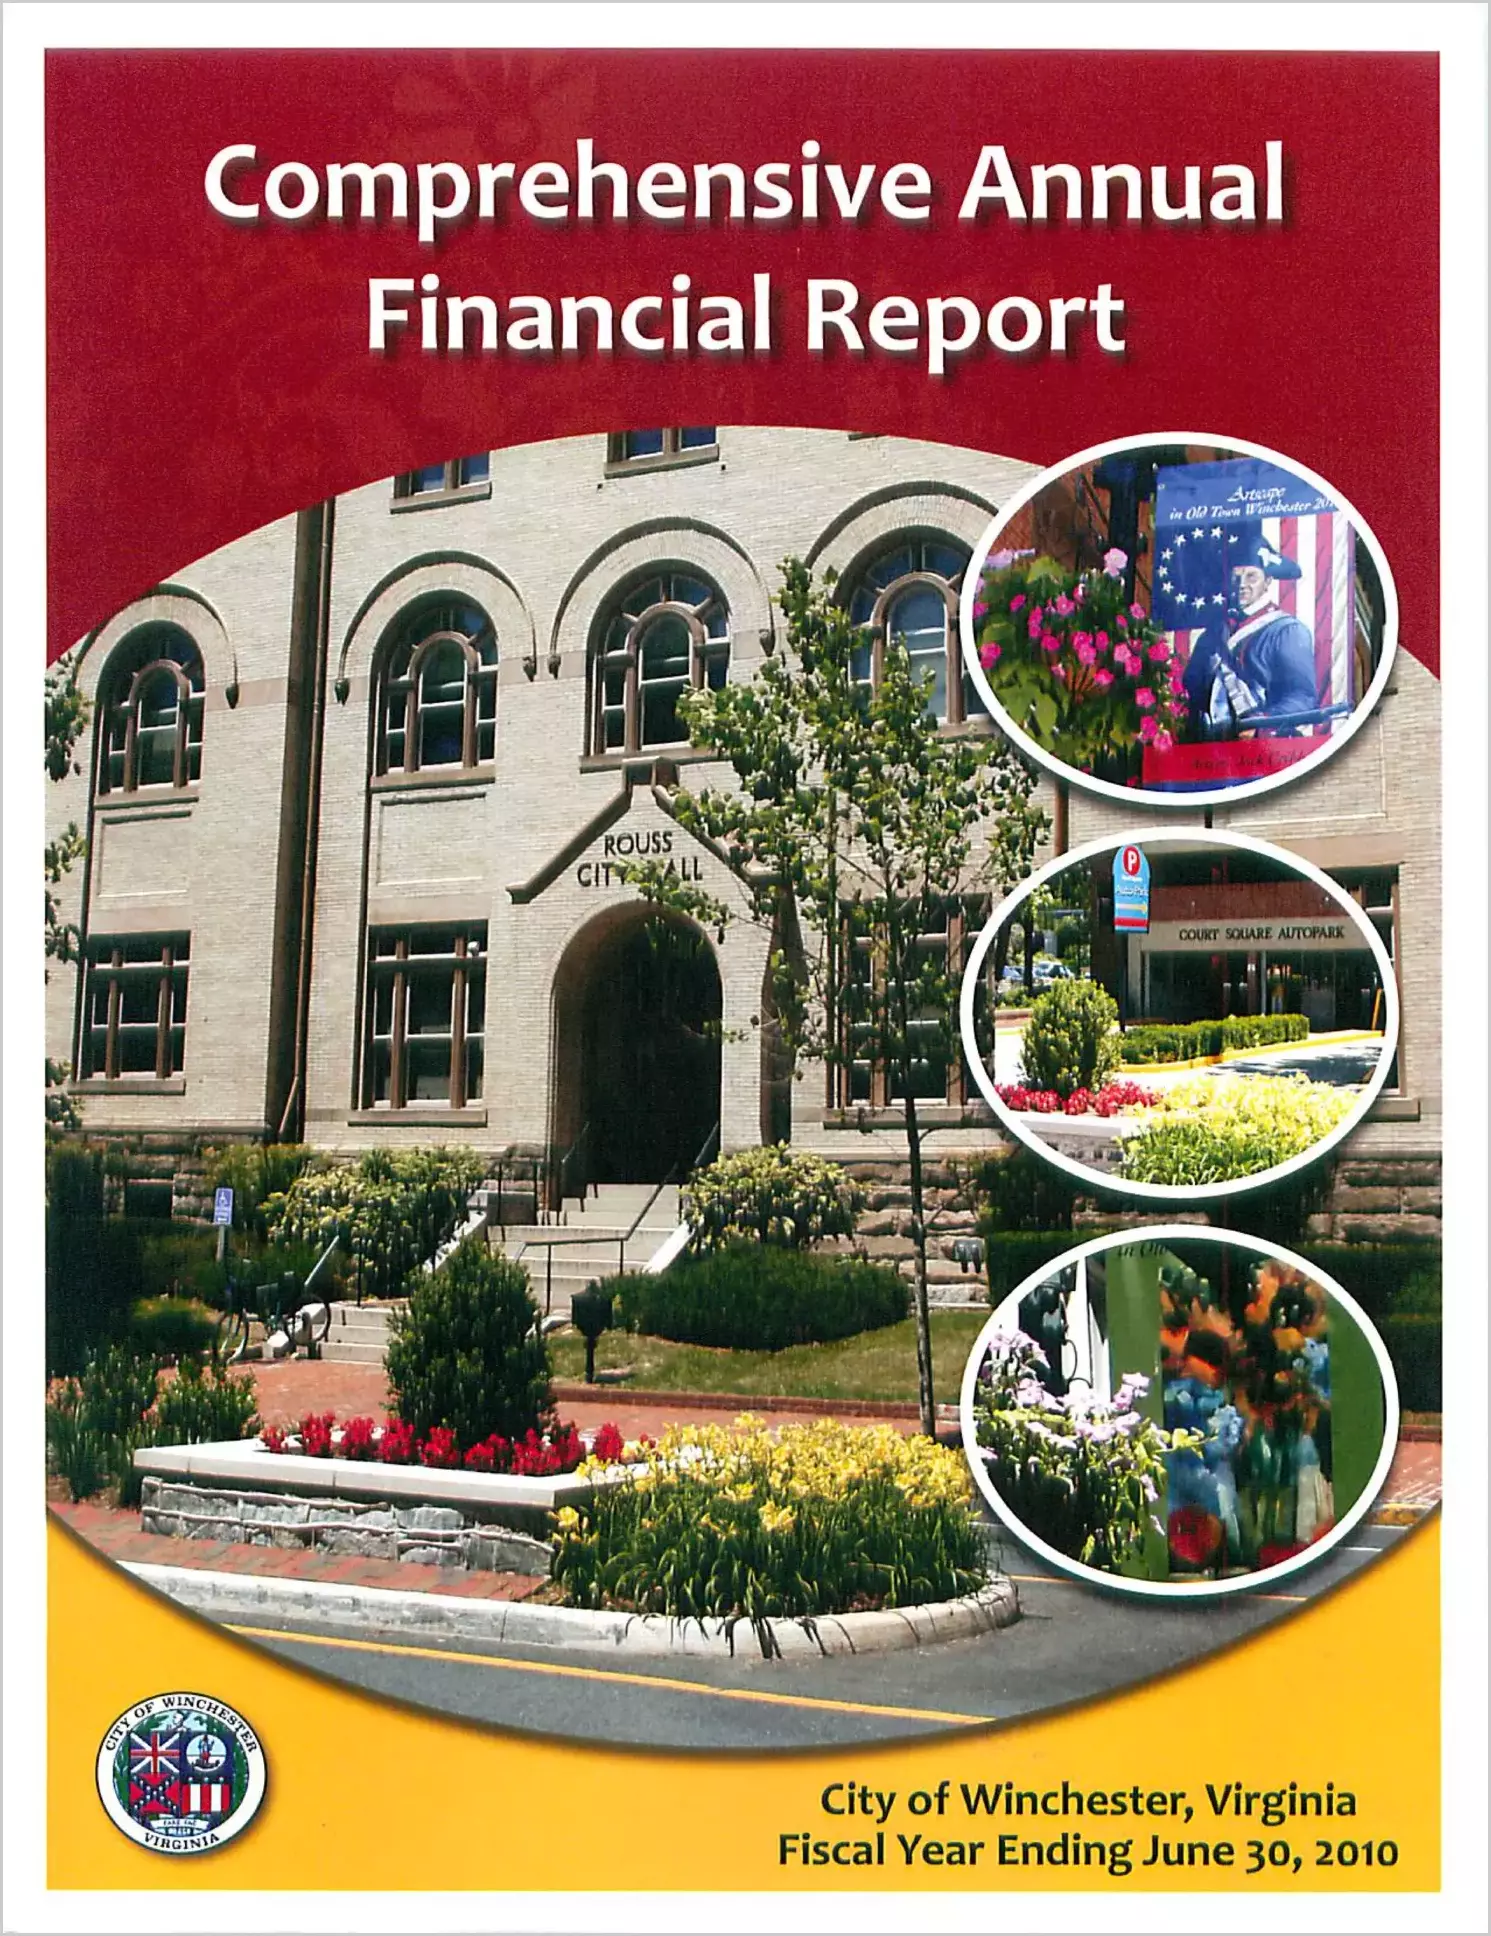 2010 Annual Financial Report for City of Winchester